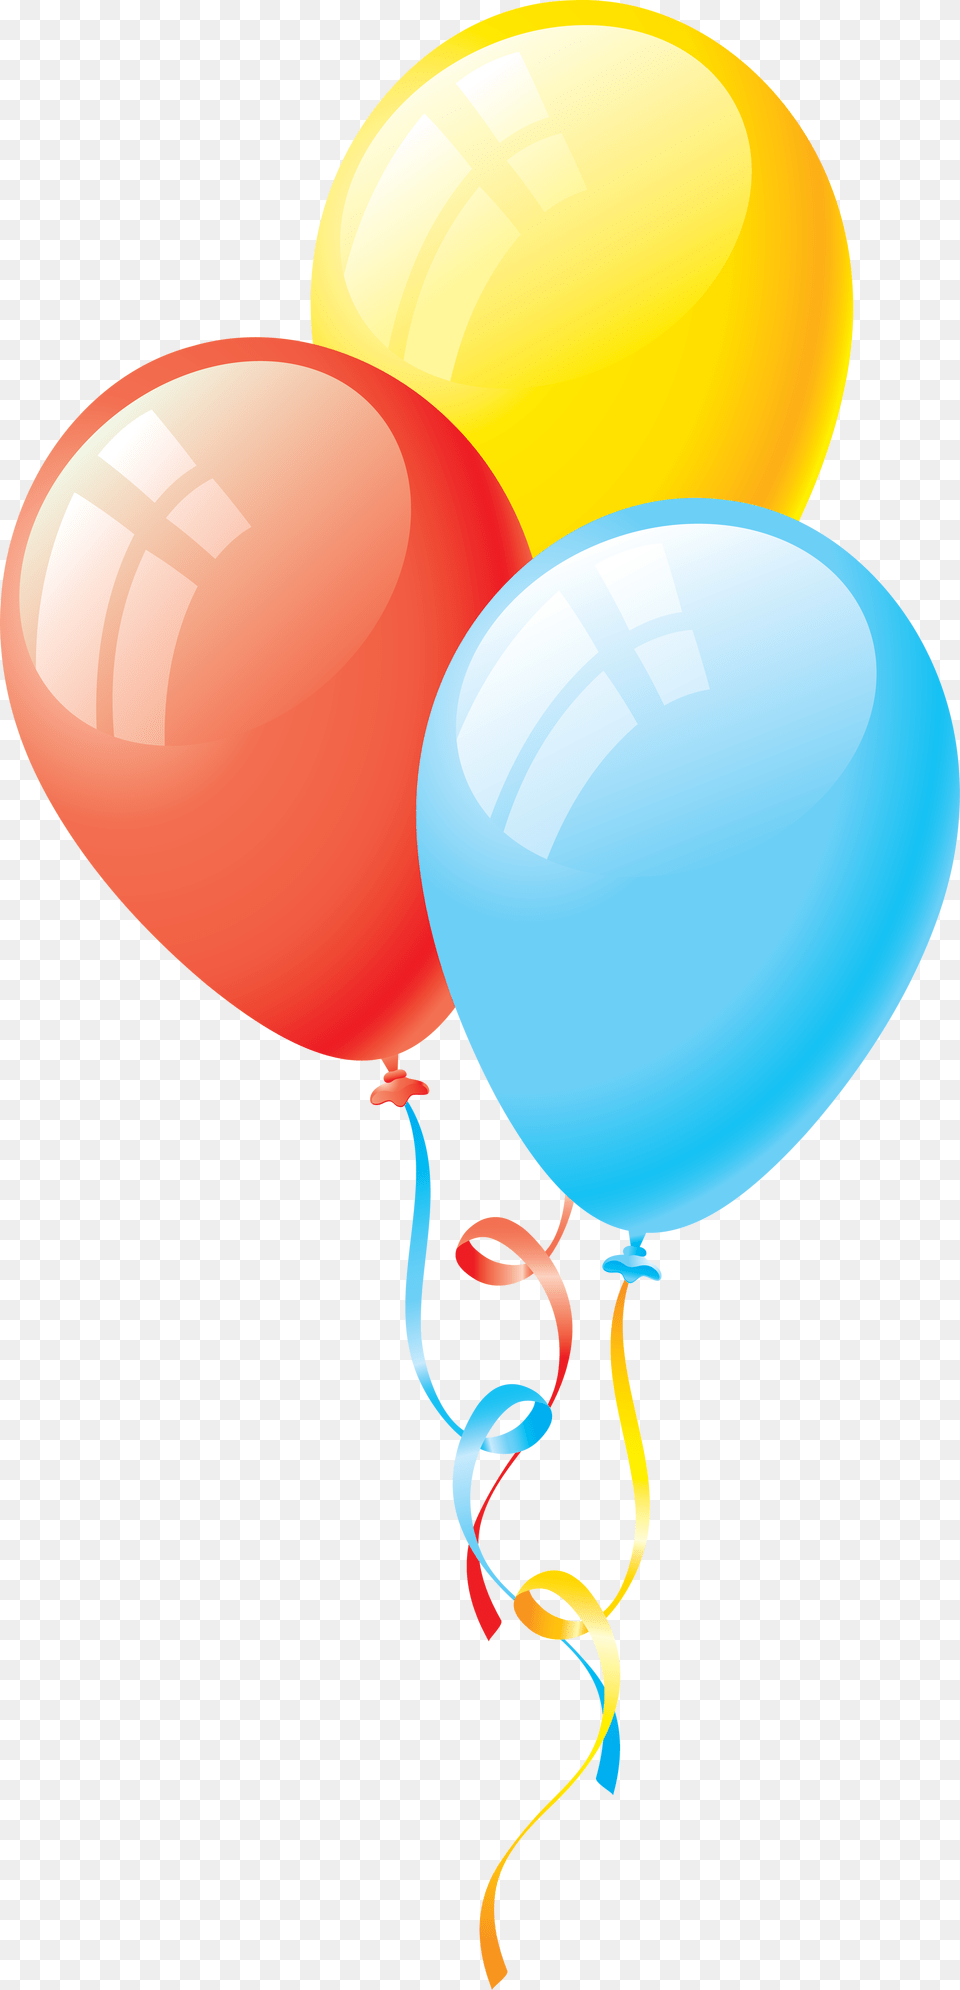 Colorful Balloon Balloons Free Png Download